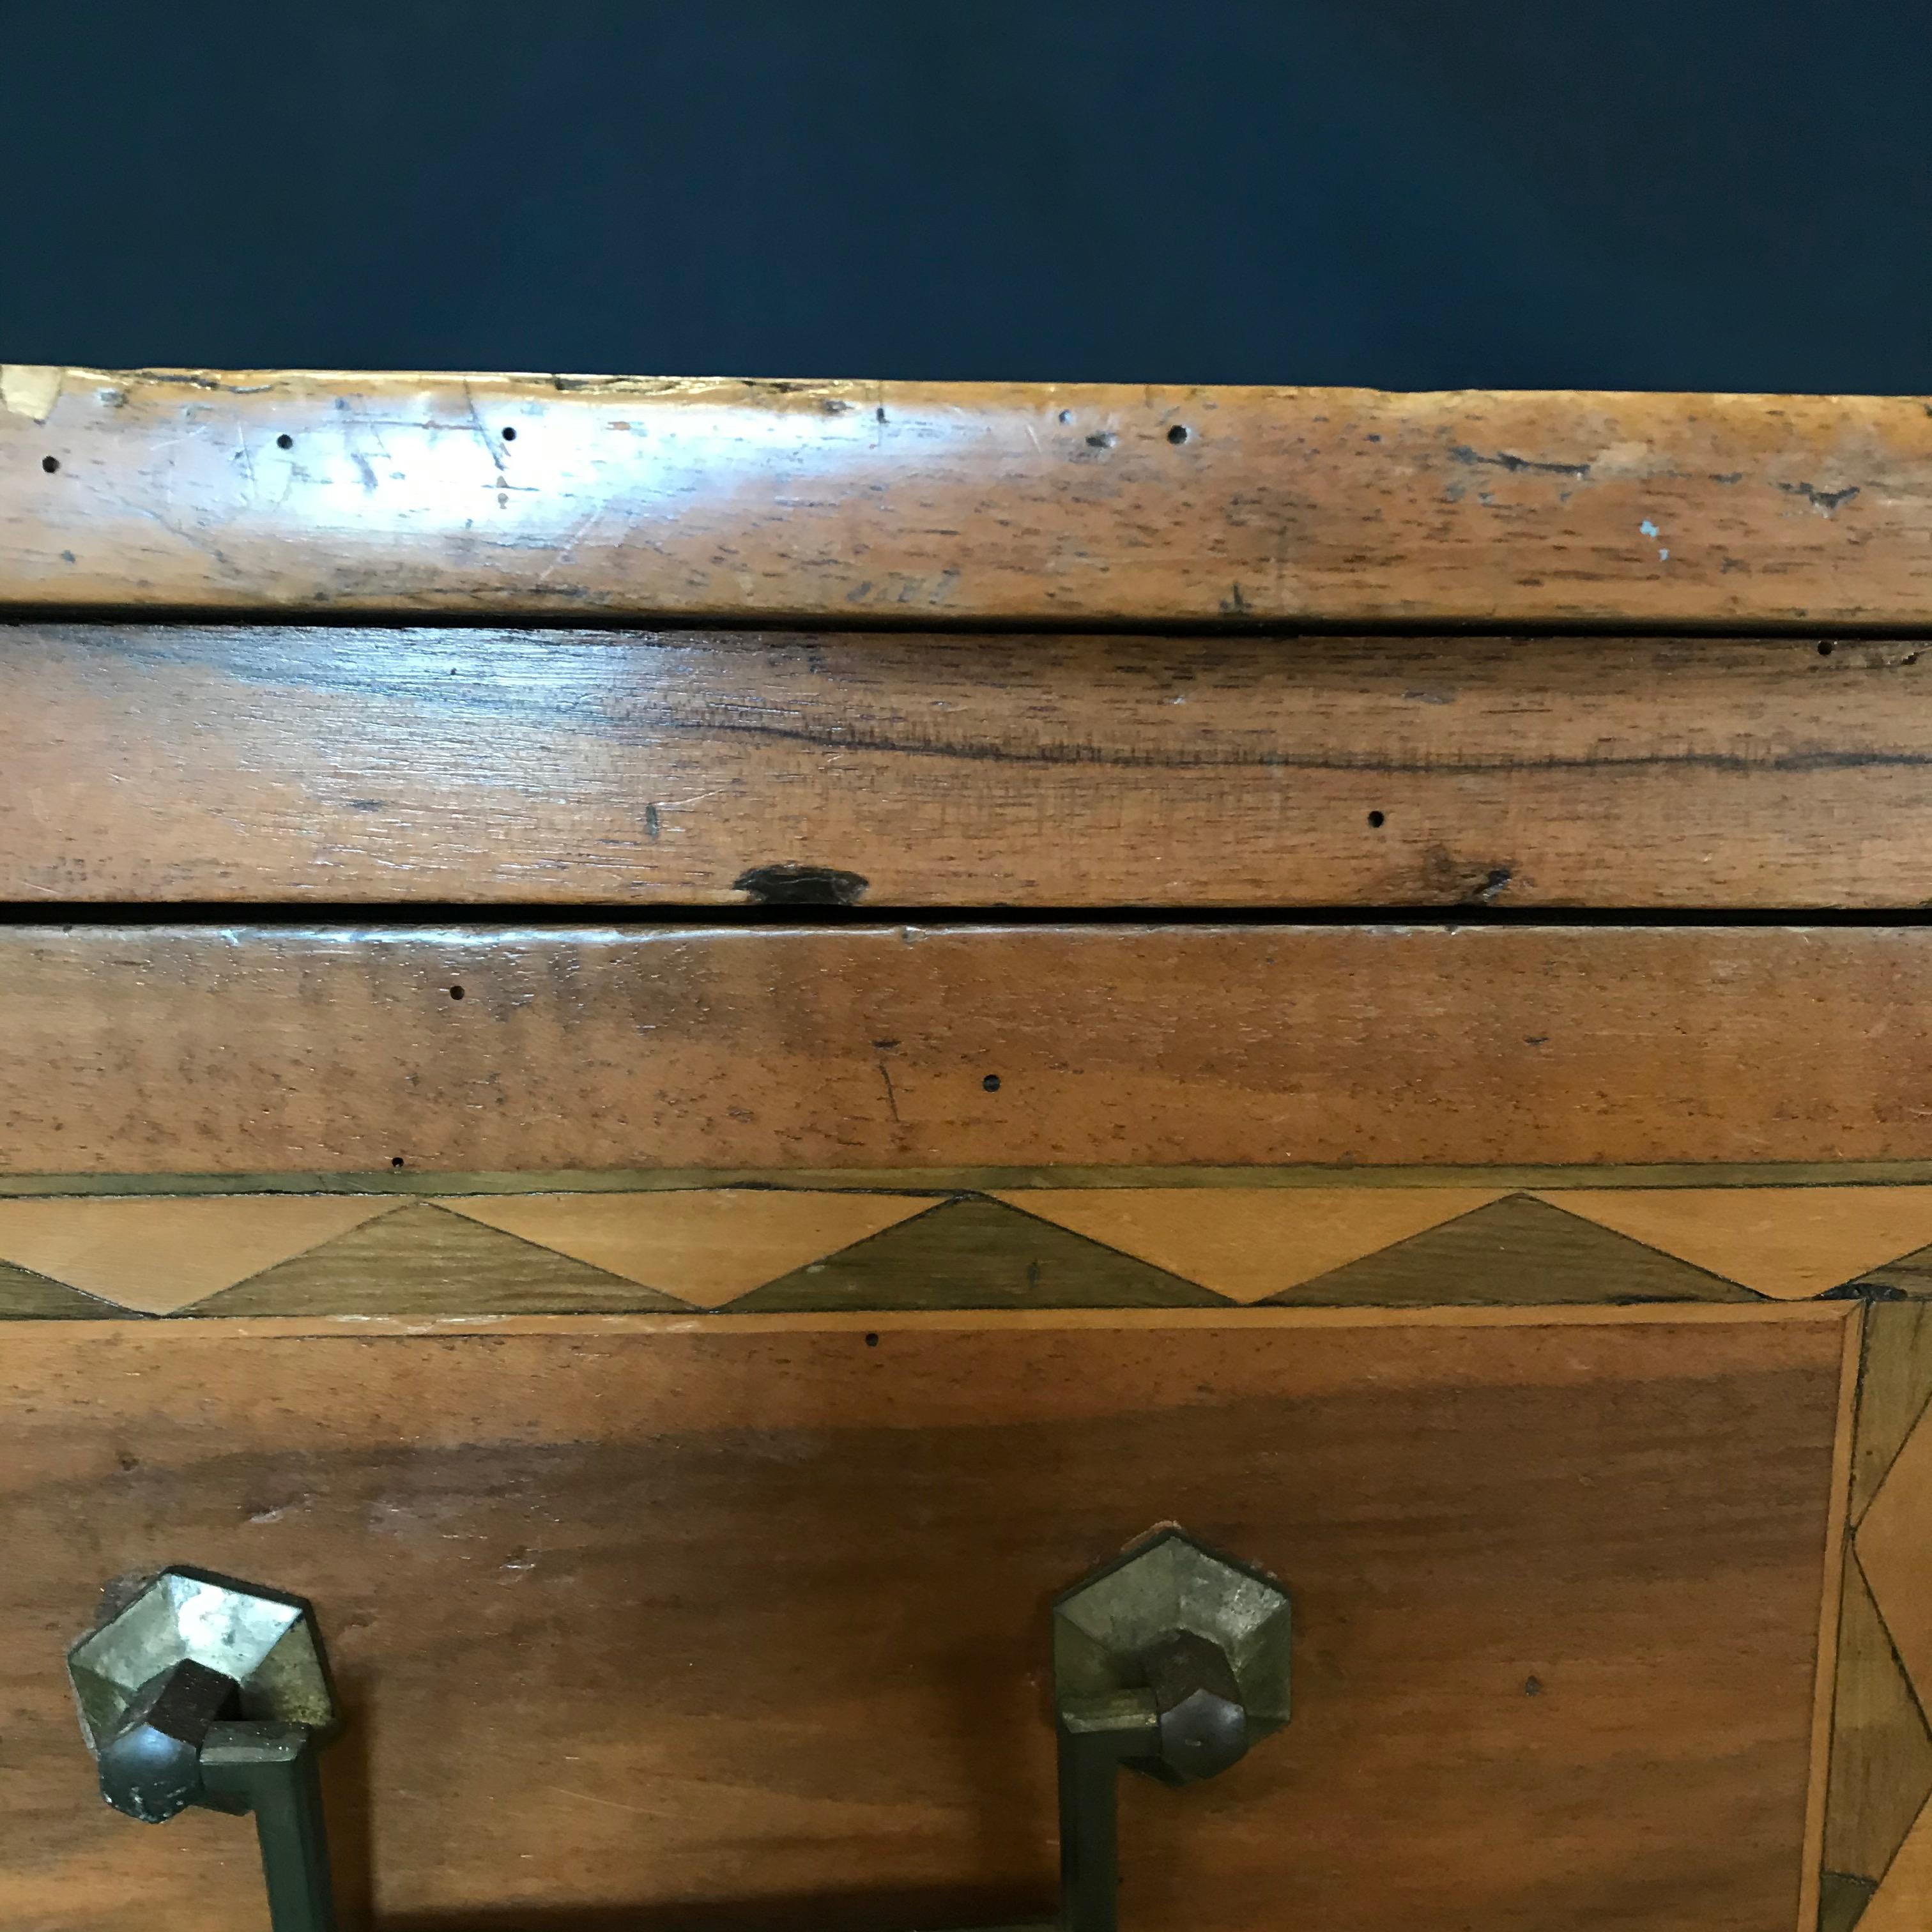 antique french drawers